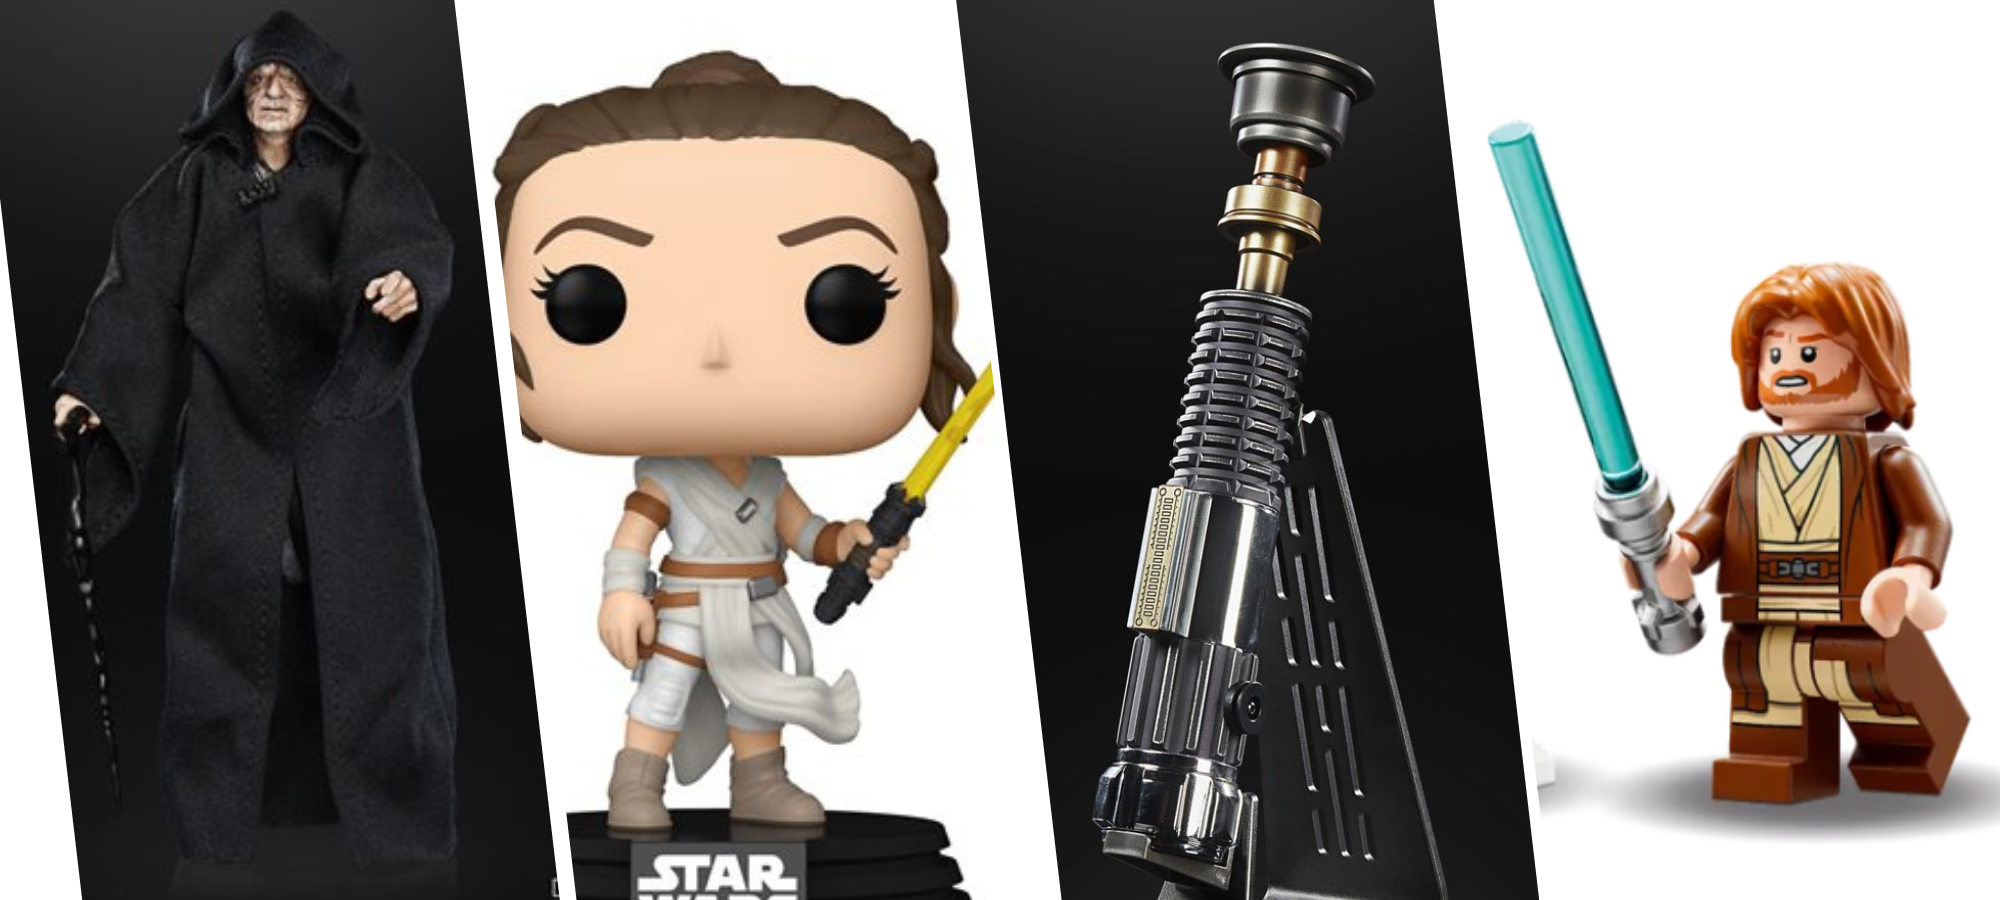 https://www.starwarsnewsnet.com/wp-content/uploads/2022/11/2022-Star-Wars-Holiday-Gift-Guide-Toys-and-Collectibles.png